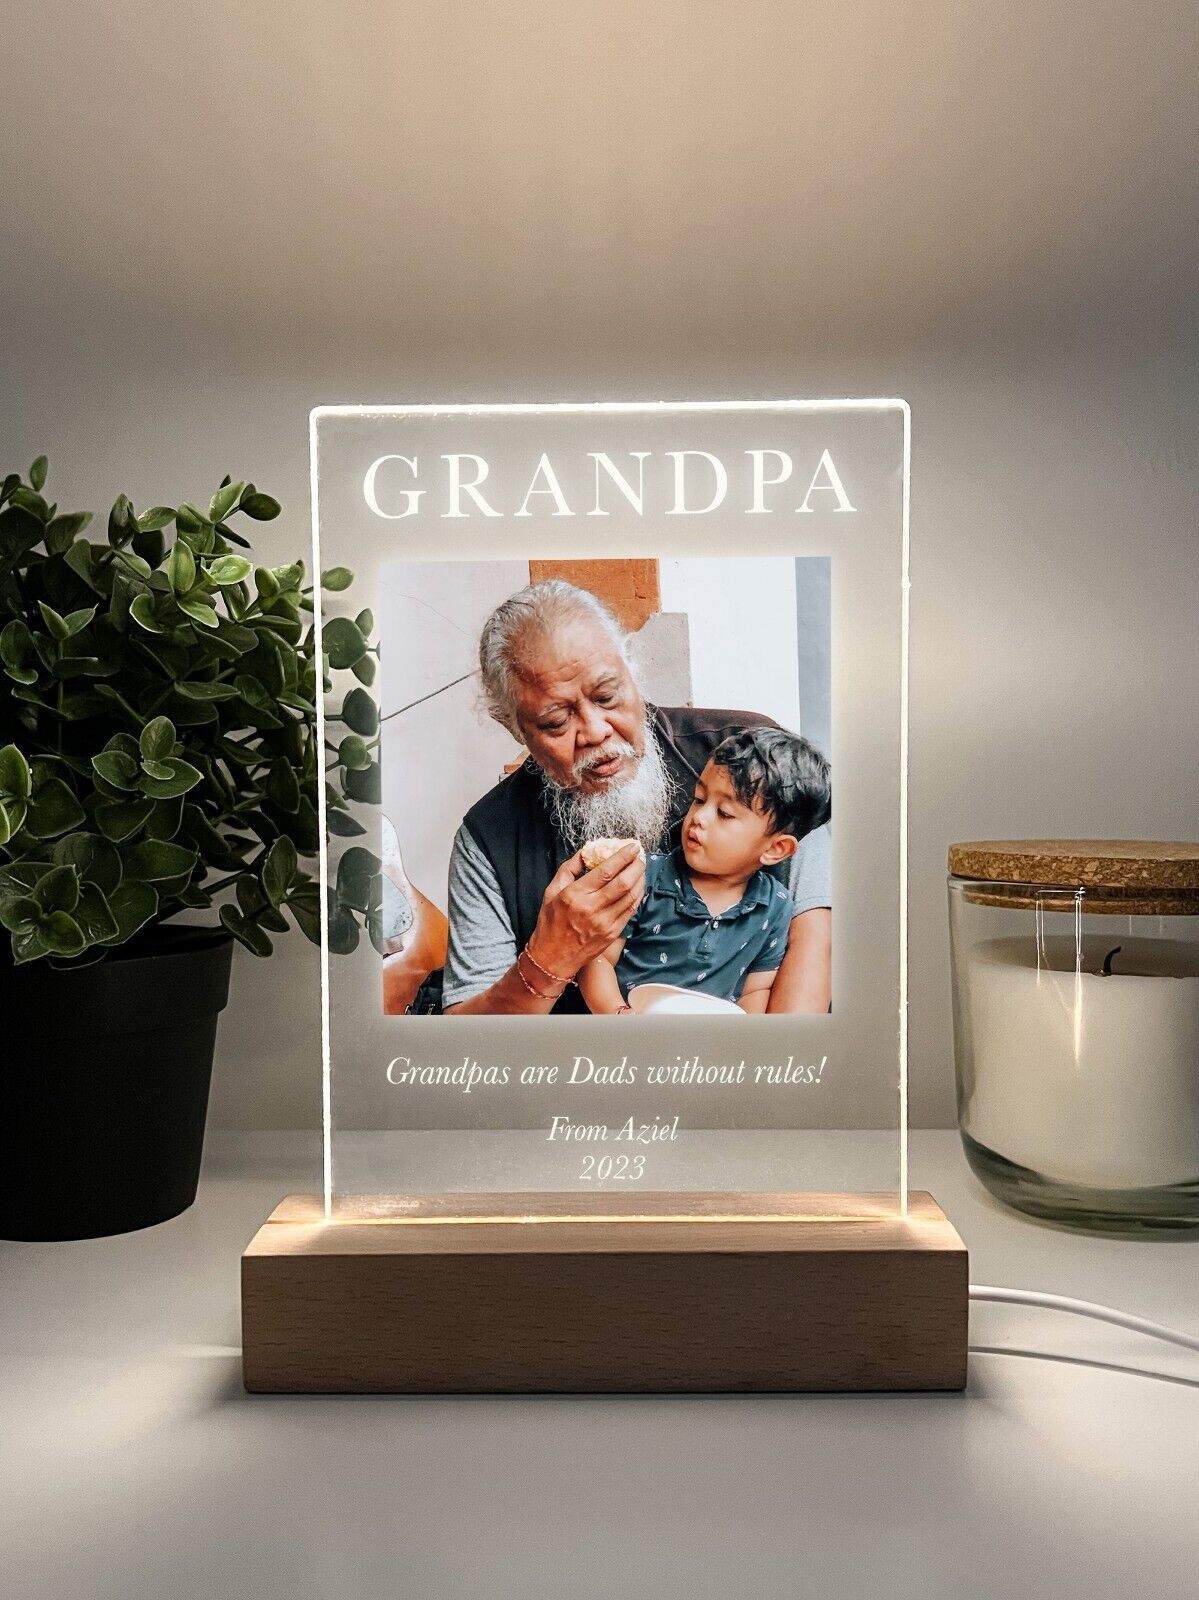 Personalized LED Light Up Wood Stand Gramps Grandpa Grandad Photo Gift